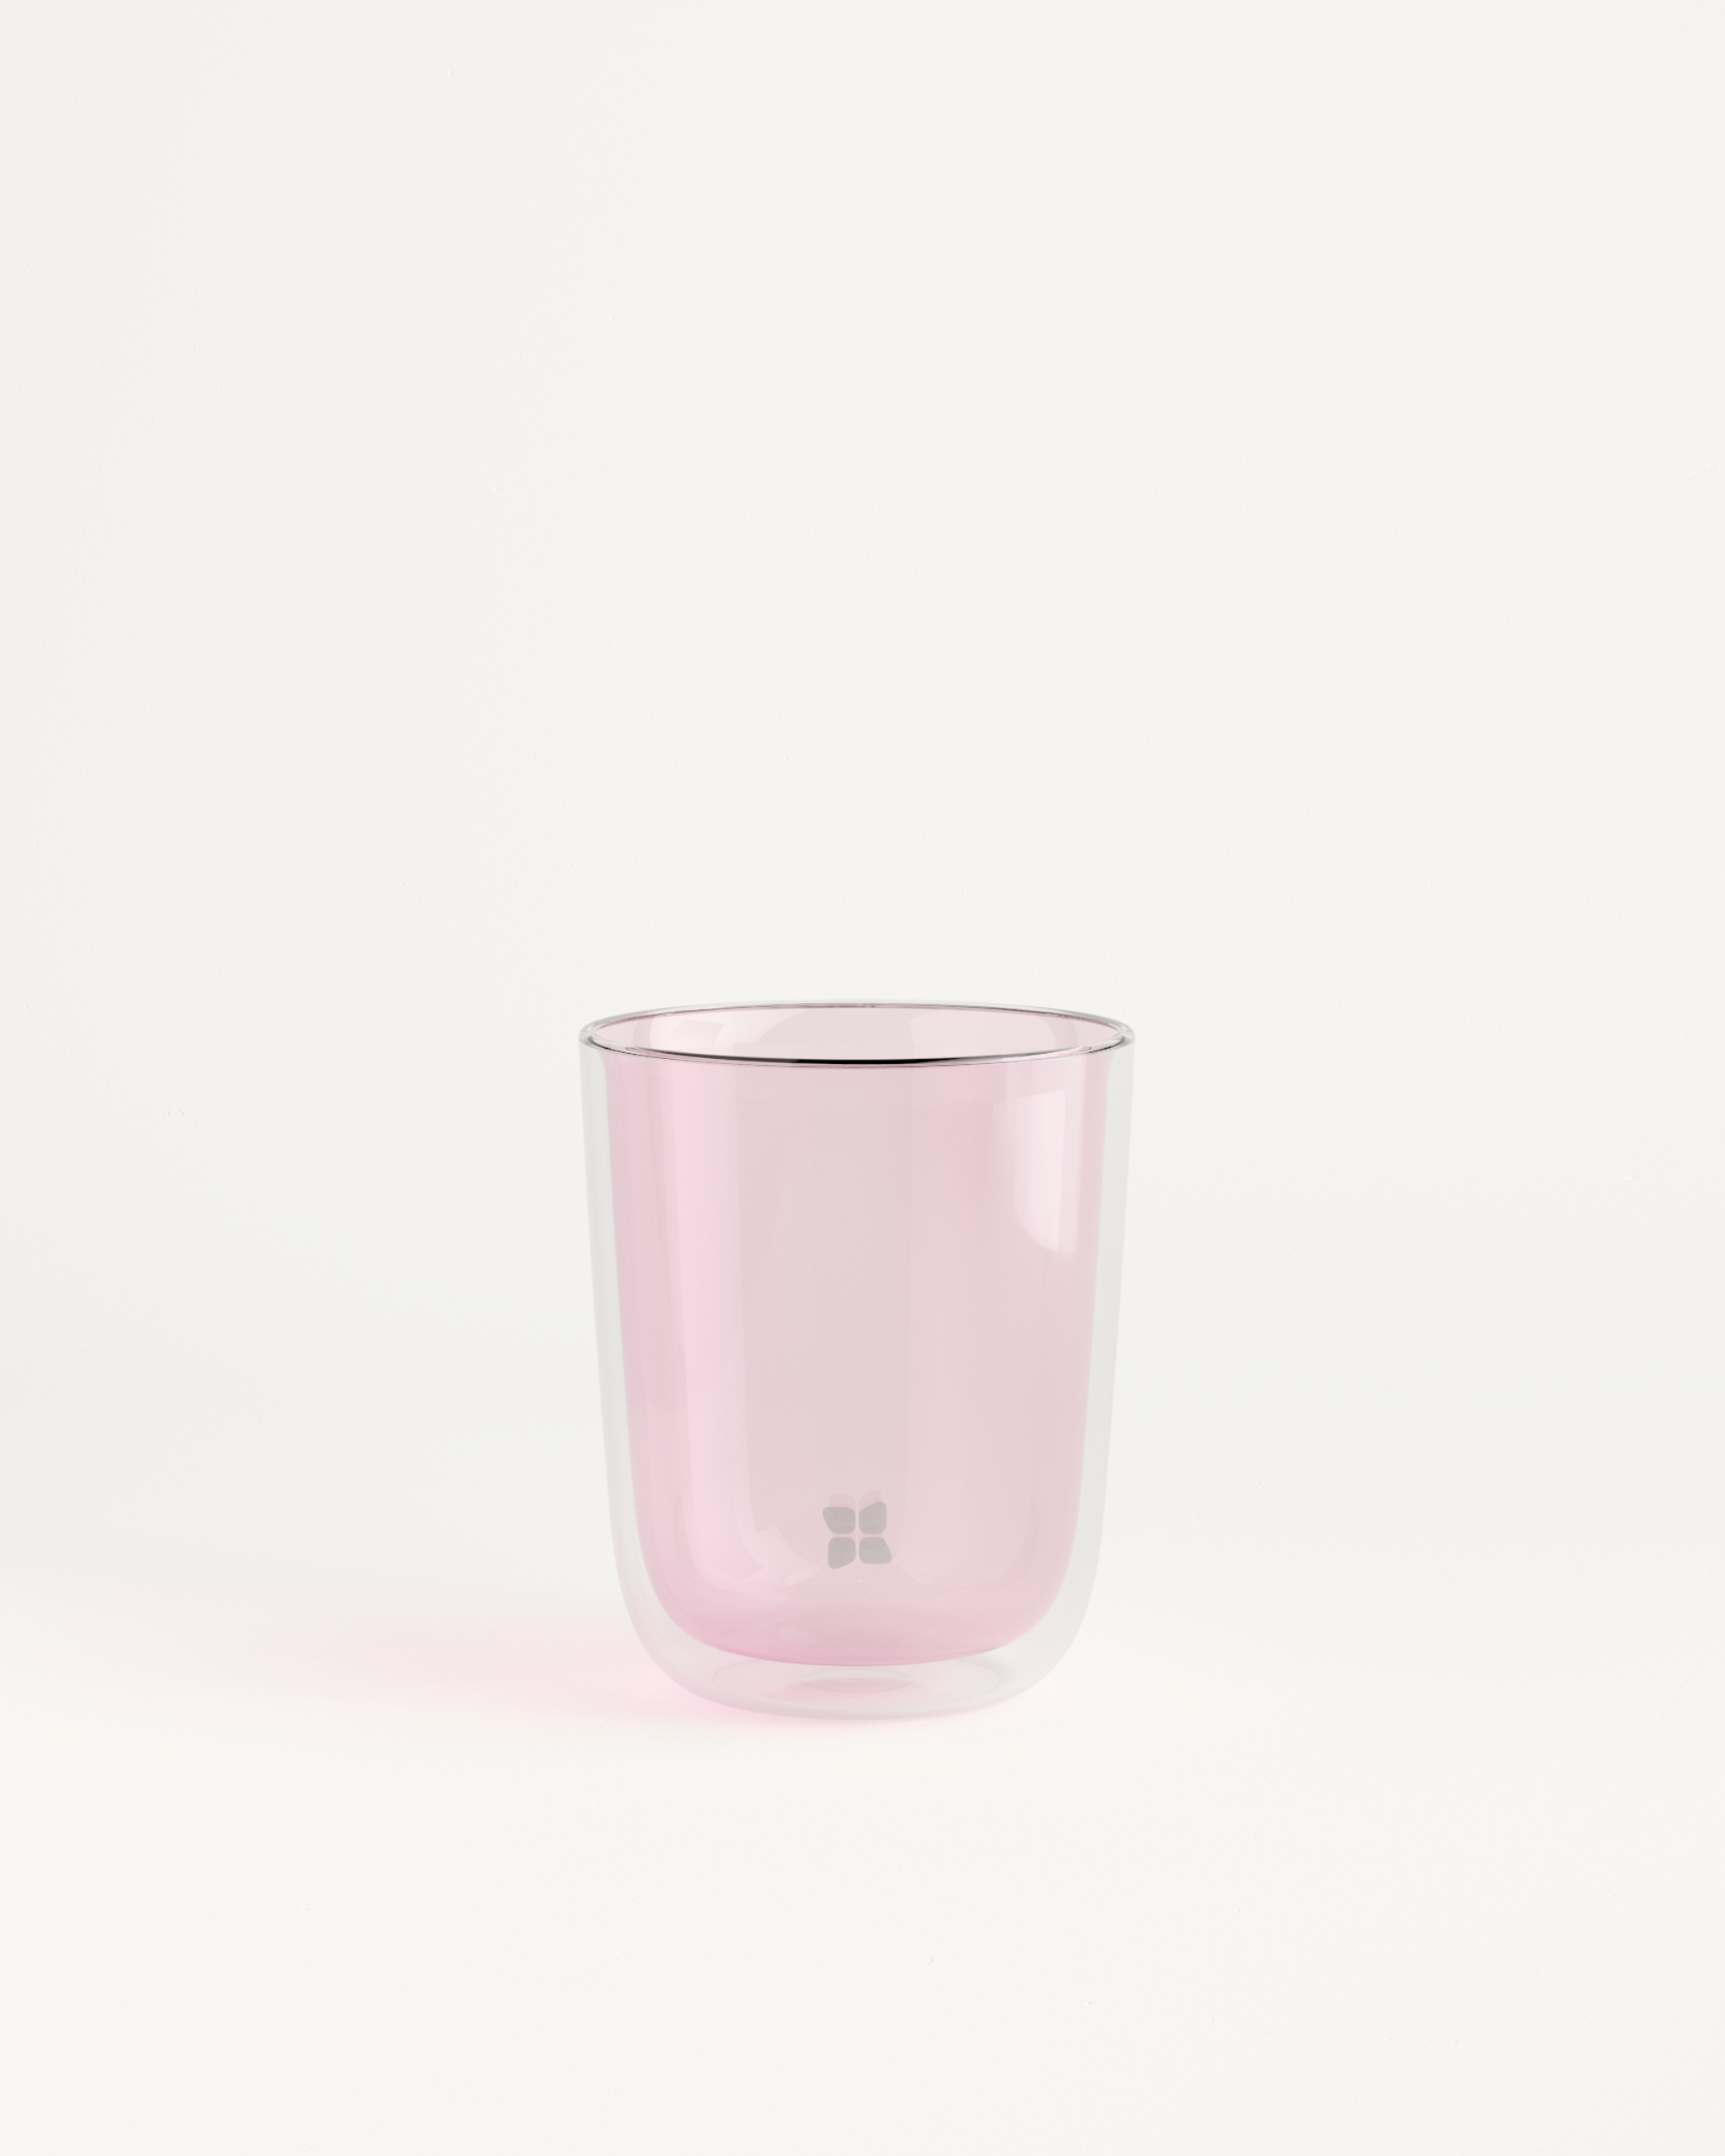 Waterdrop Glass Cup - Light Pink Transparent - 2x13oz - Double-Walled Borosilicate Glass